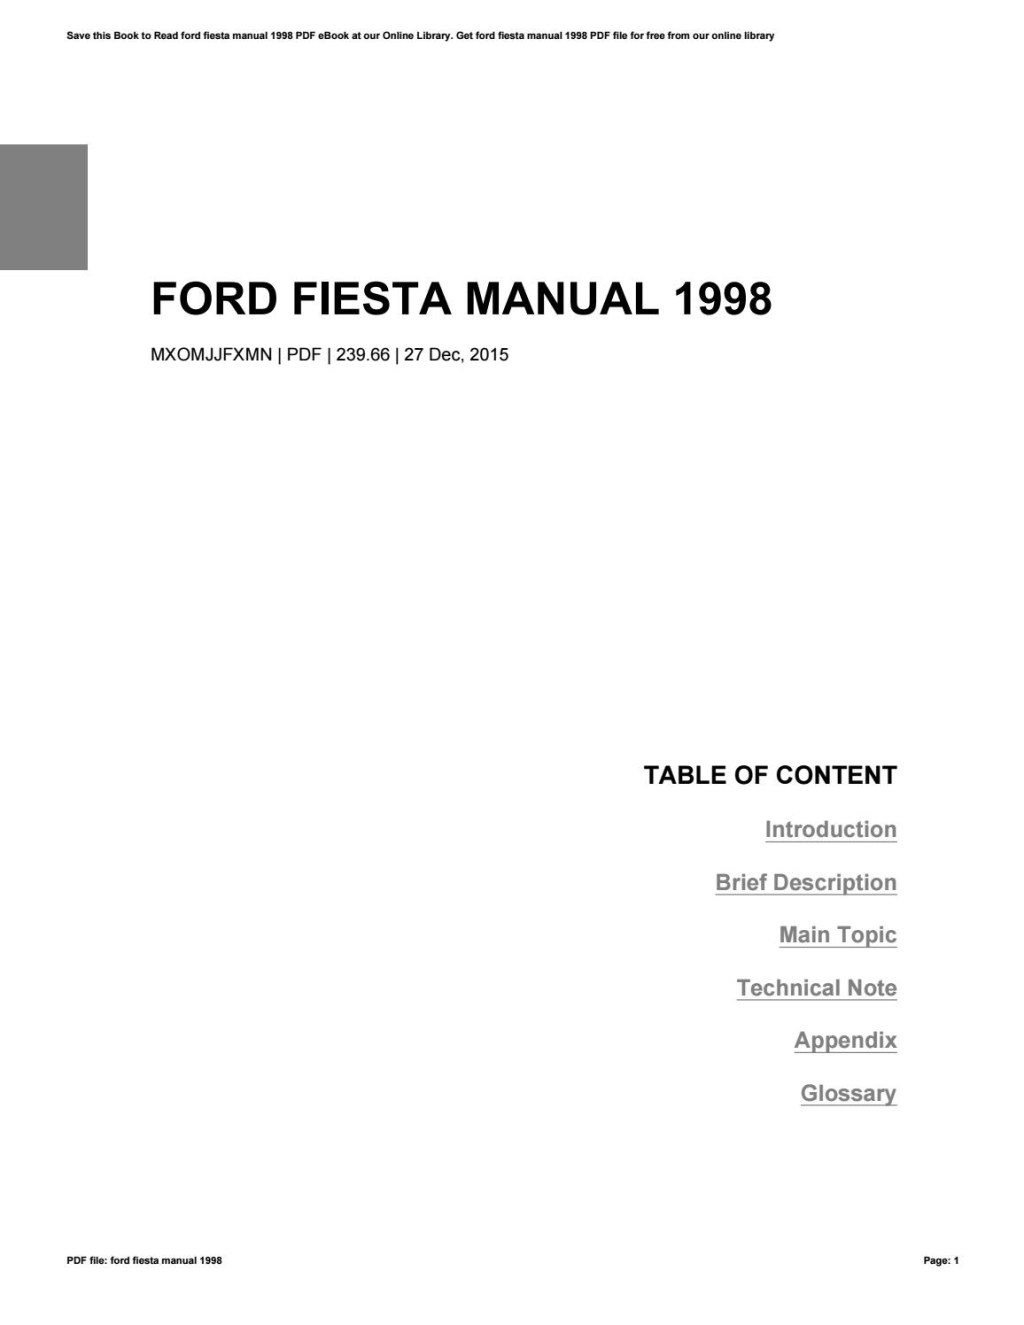 Picture of: Ford fiesta manual  by freealtgen – Issuu